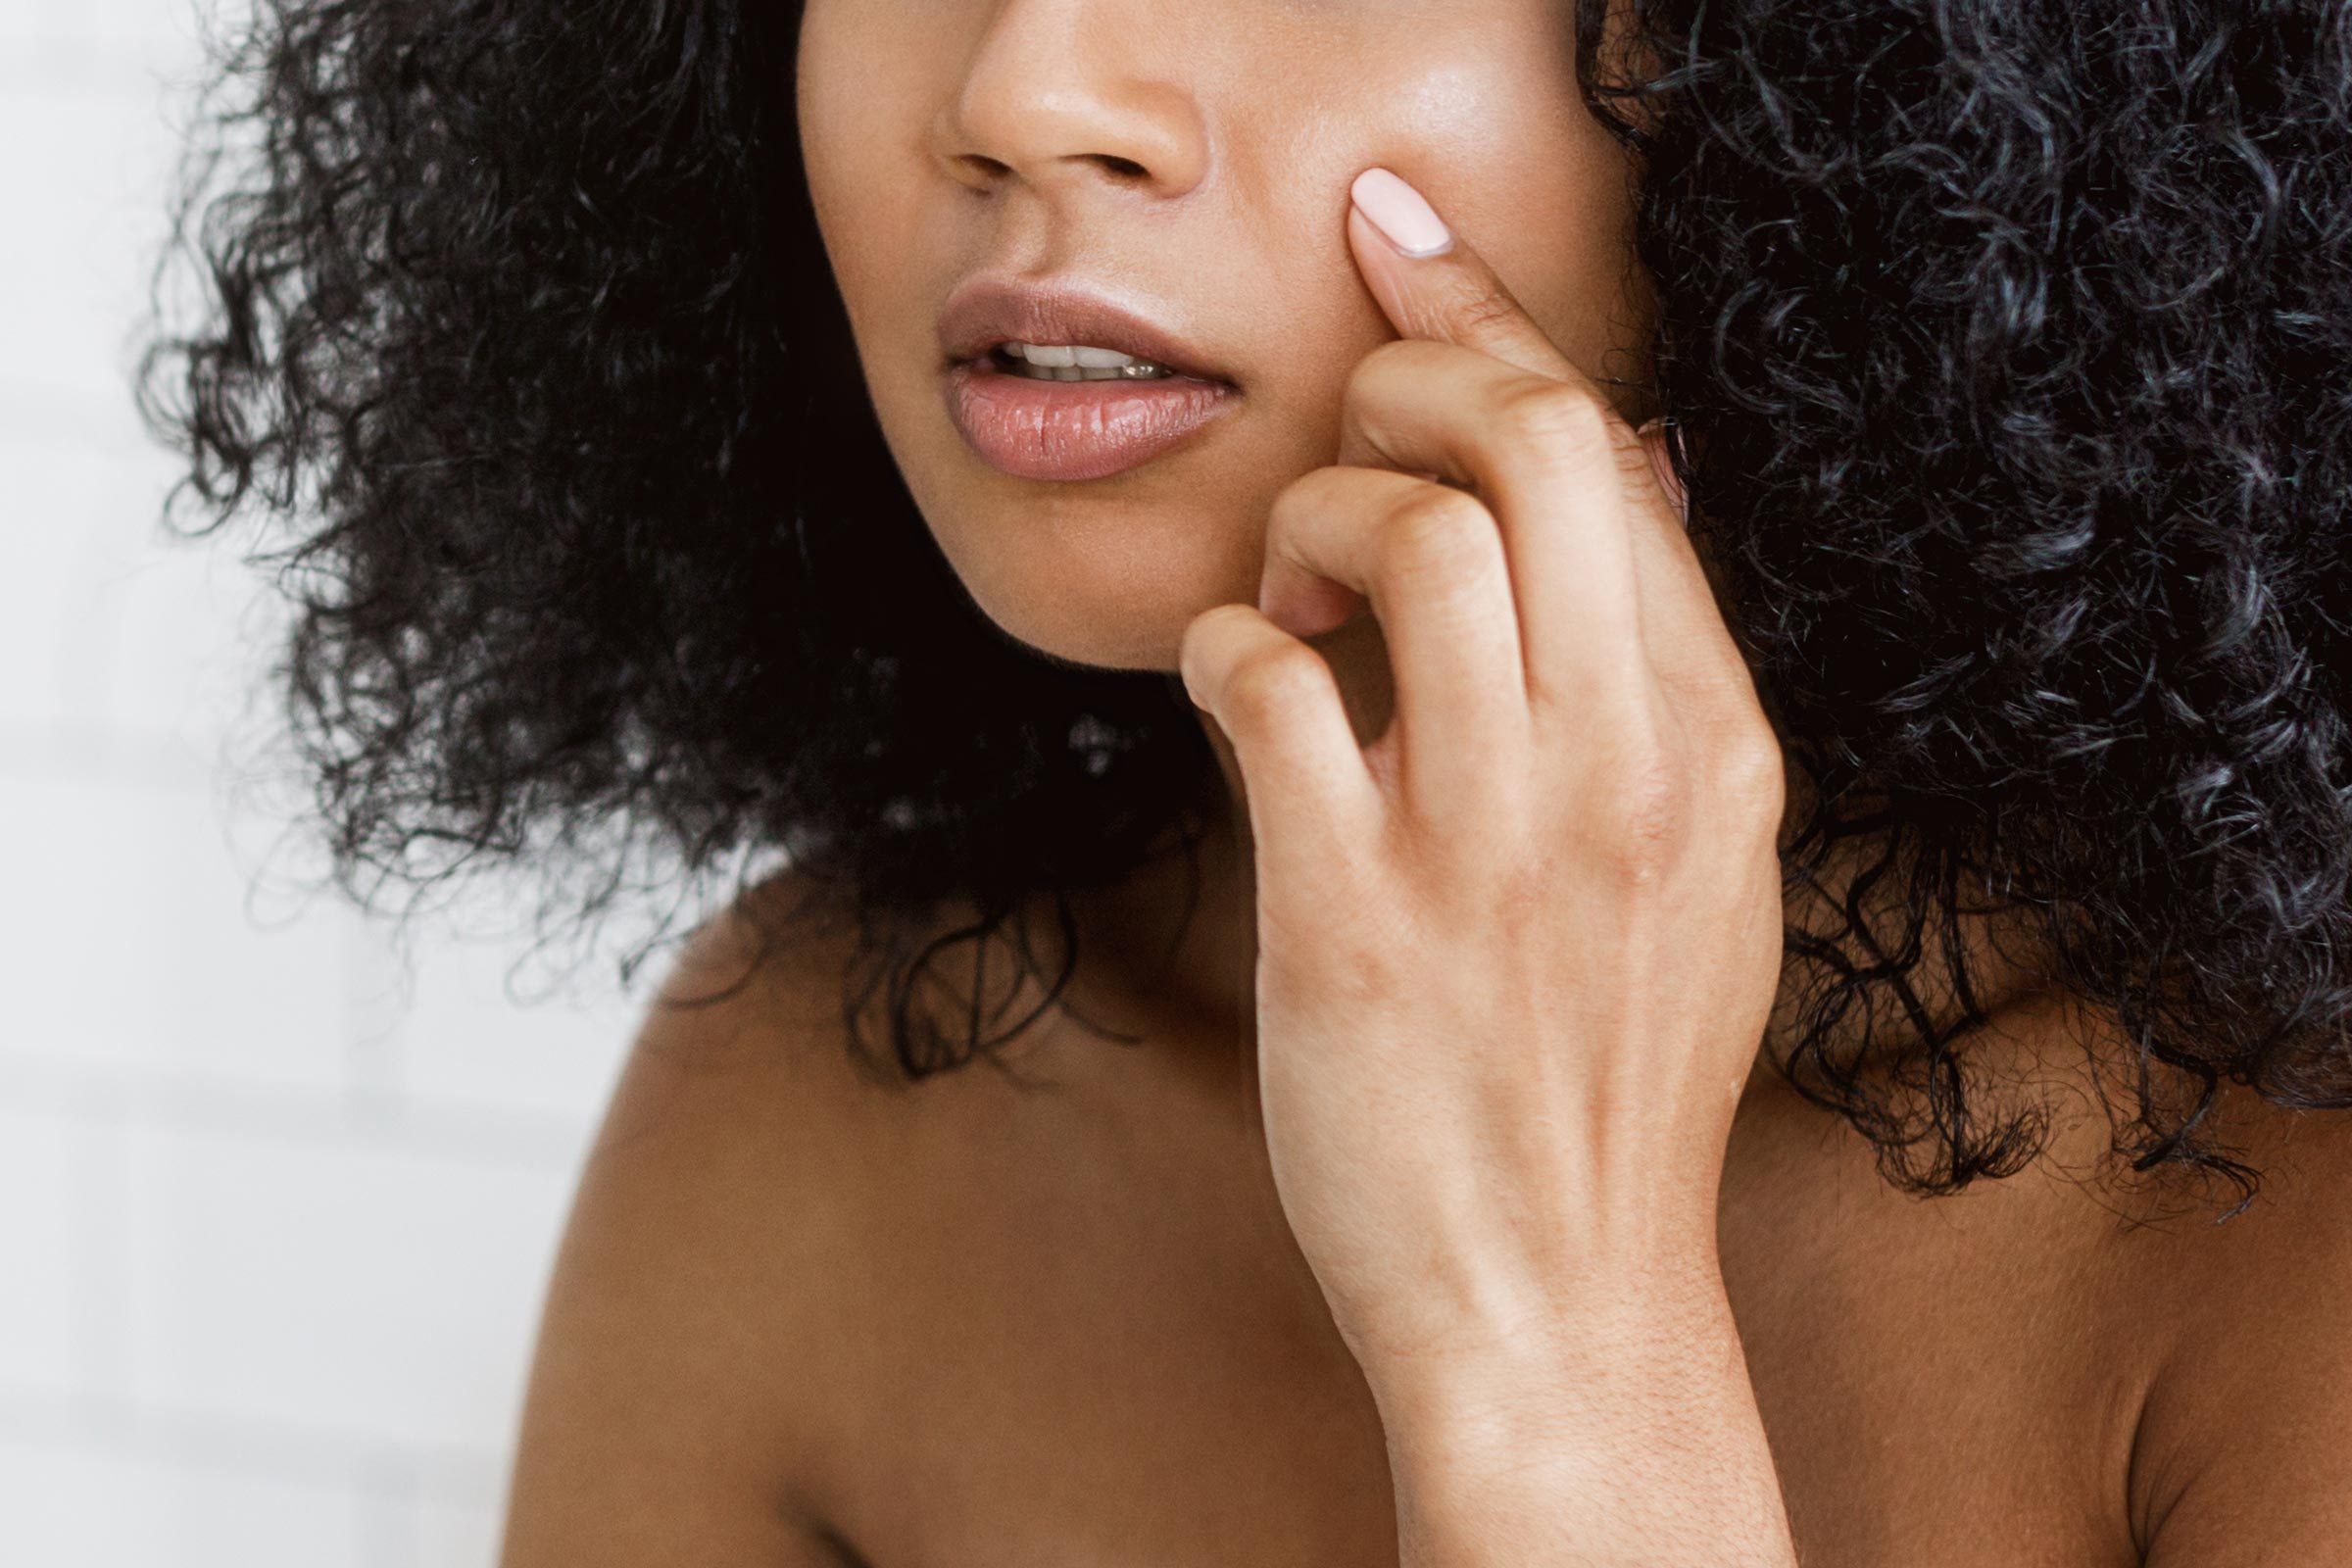 The Dermatologist-Approved Way to Pop a Pimple at Home